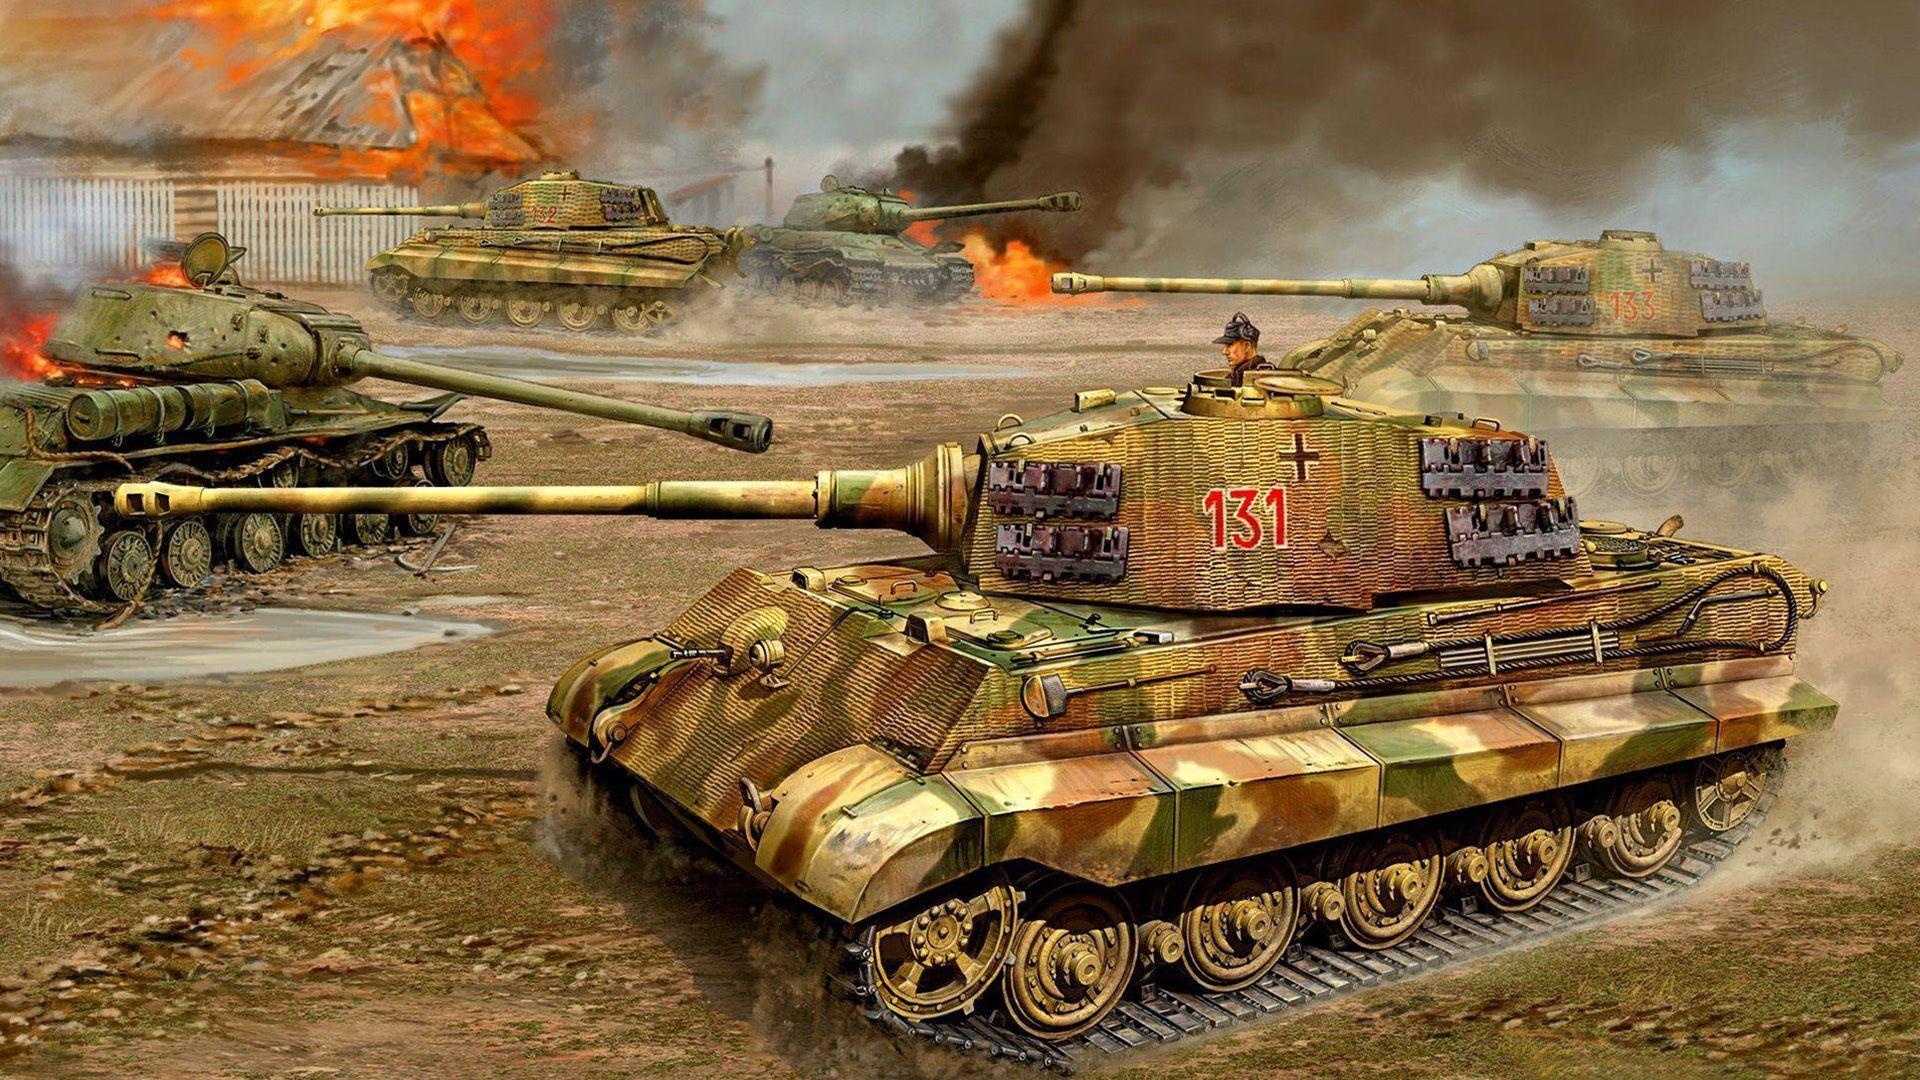 Tiger Tank Wallpapers High Definition 12554